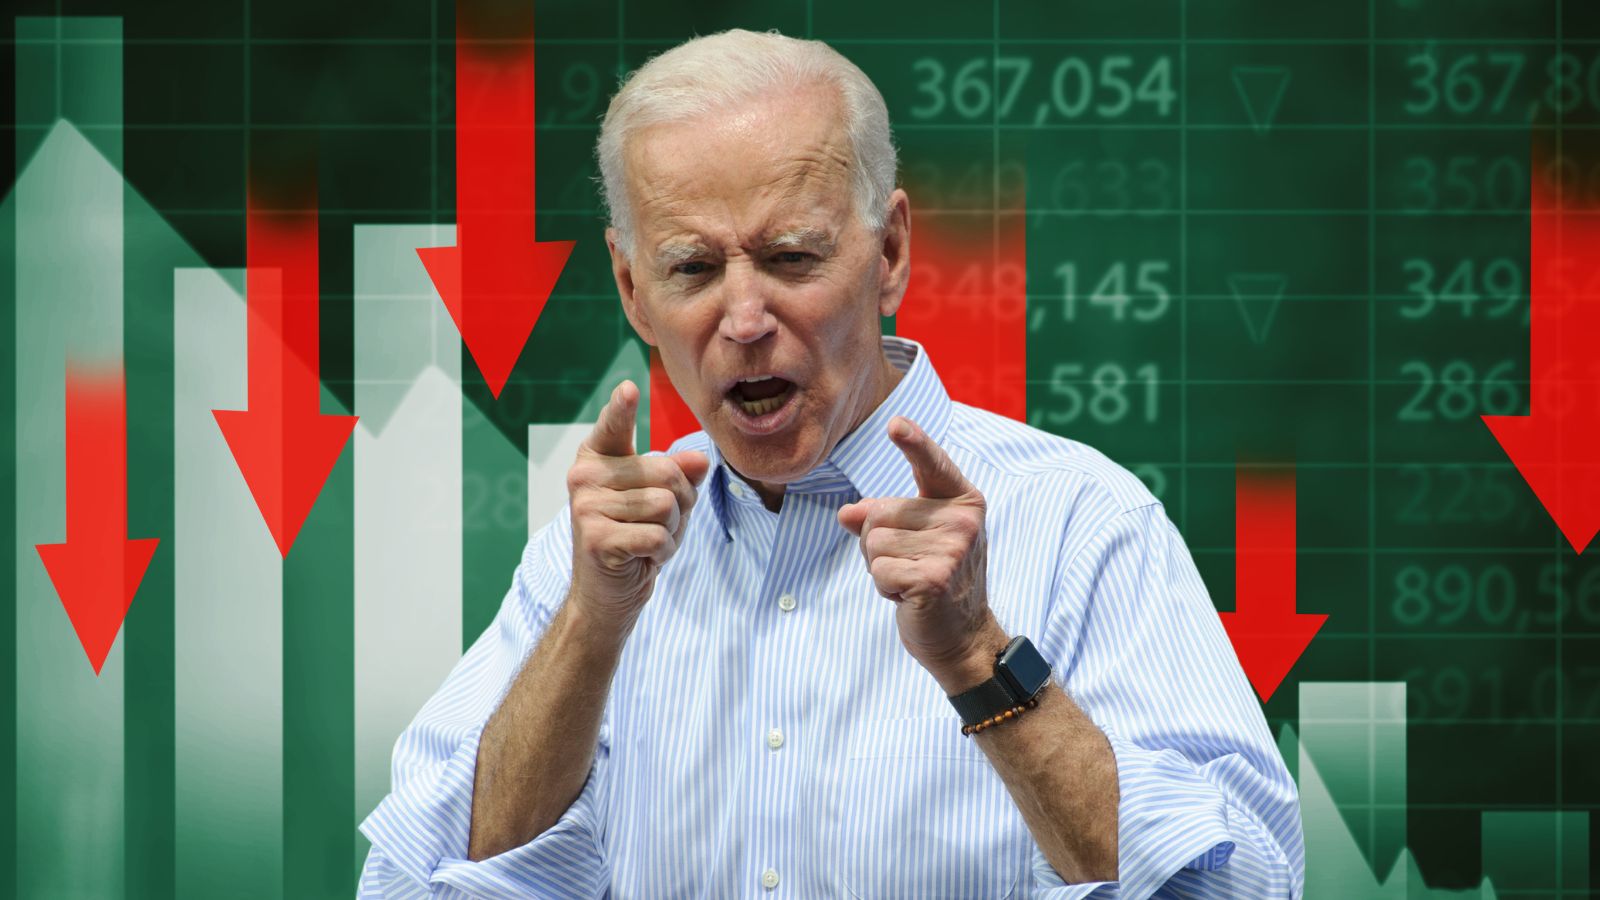 “Bidenomics at Its Finest”: Suddenly We’re Talking About “Deflation”